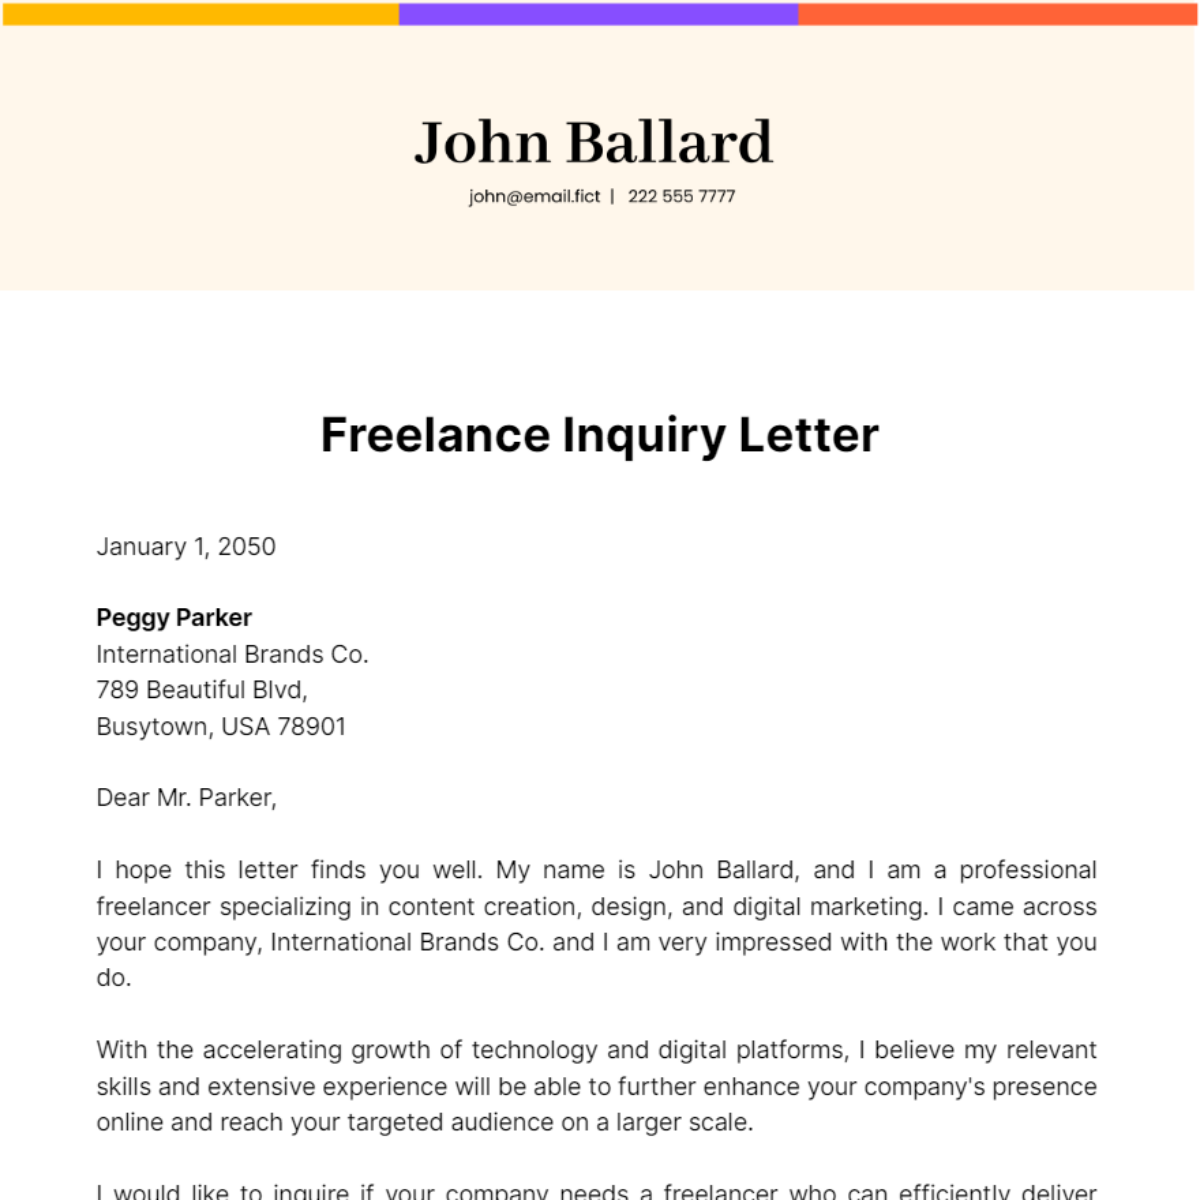 Freelance Inquiry Letter Template